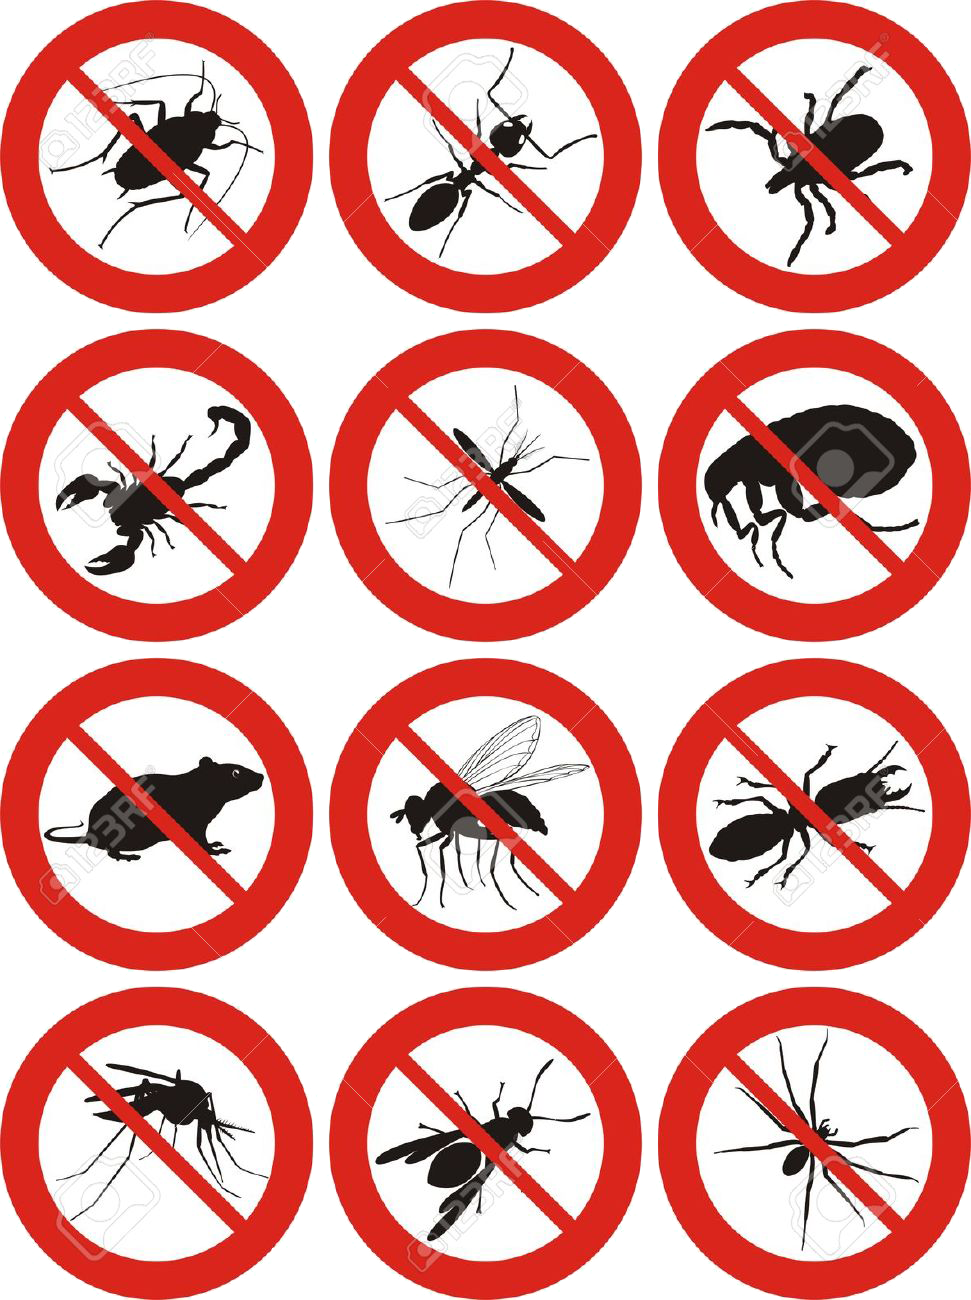 19903842 Pests Icon Pest Control Stock Vector Pest - Pest Control Images Free (971x1300)